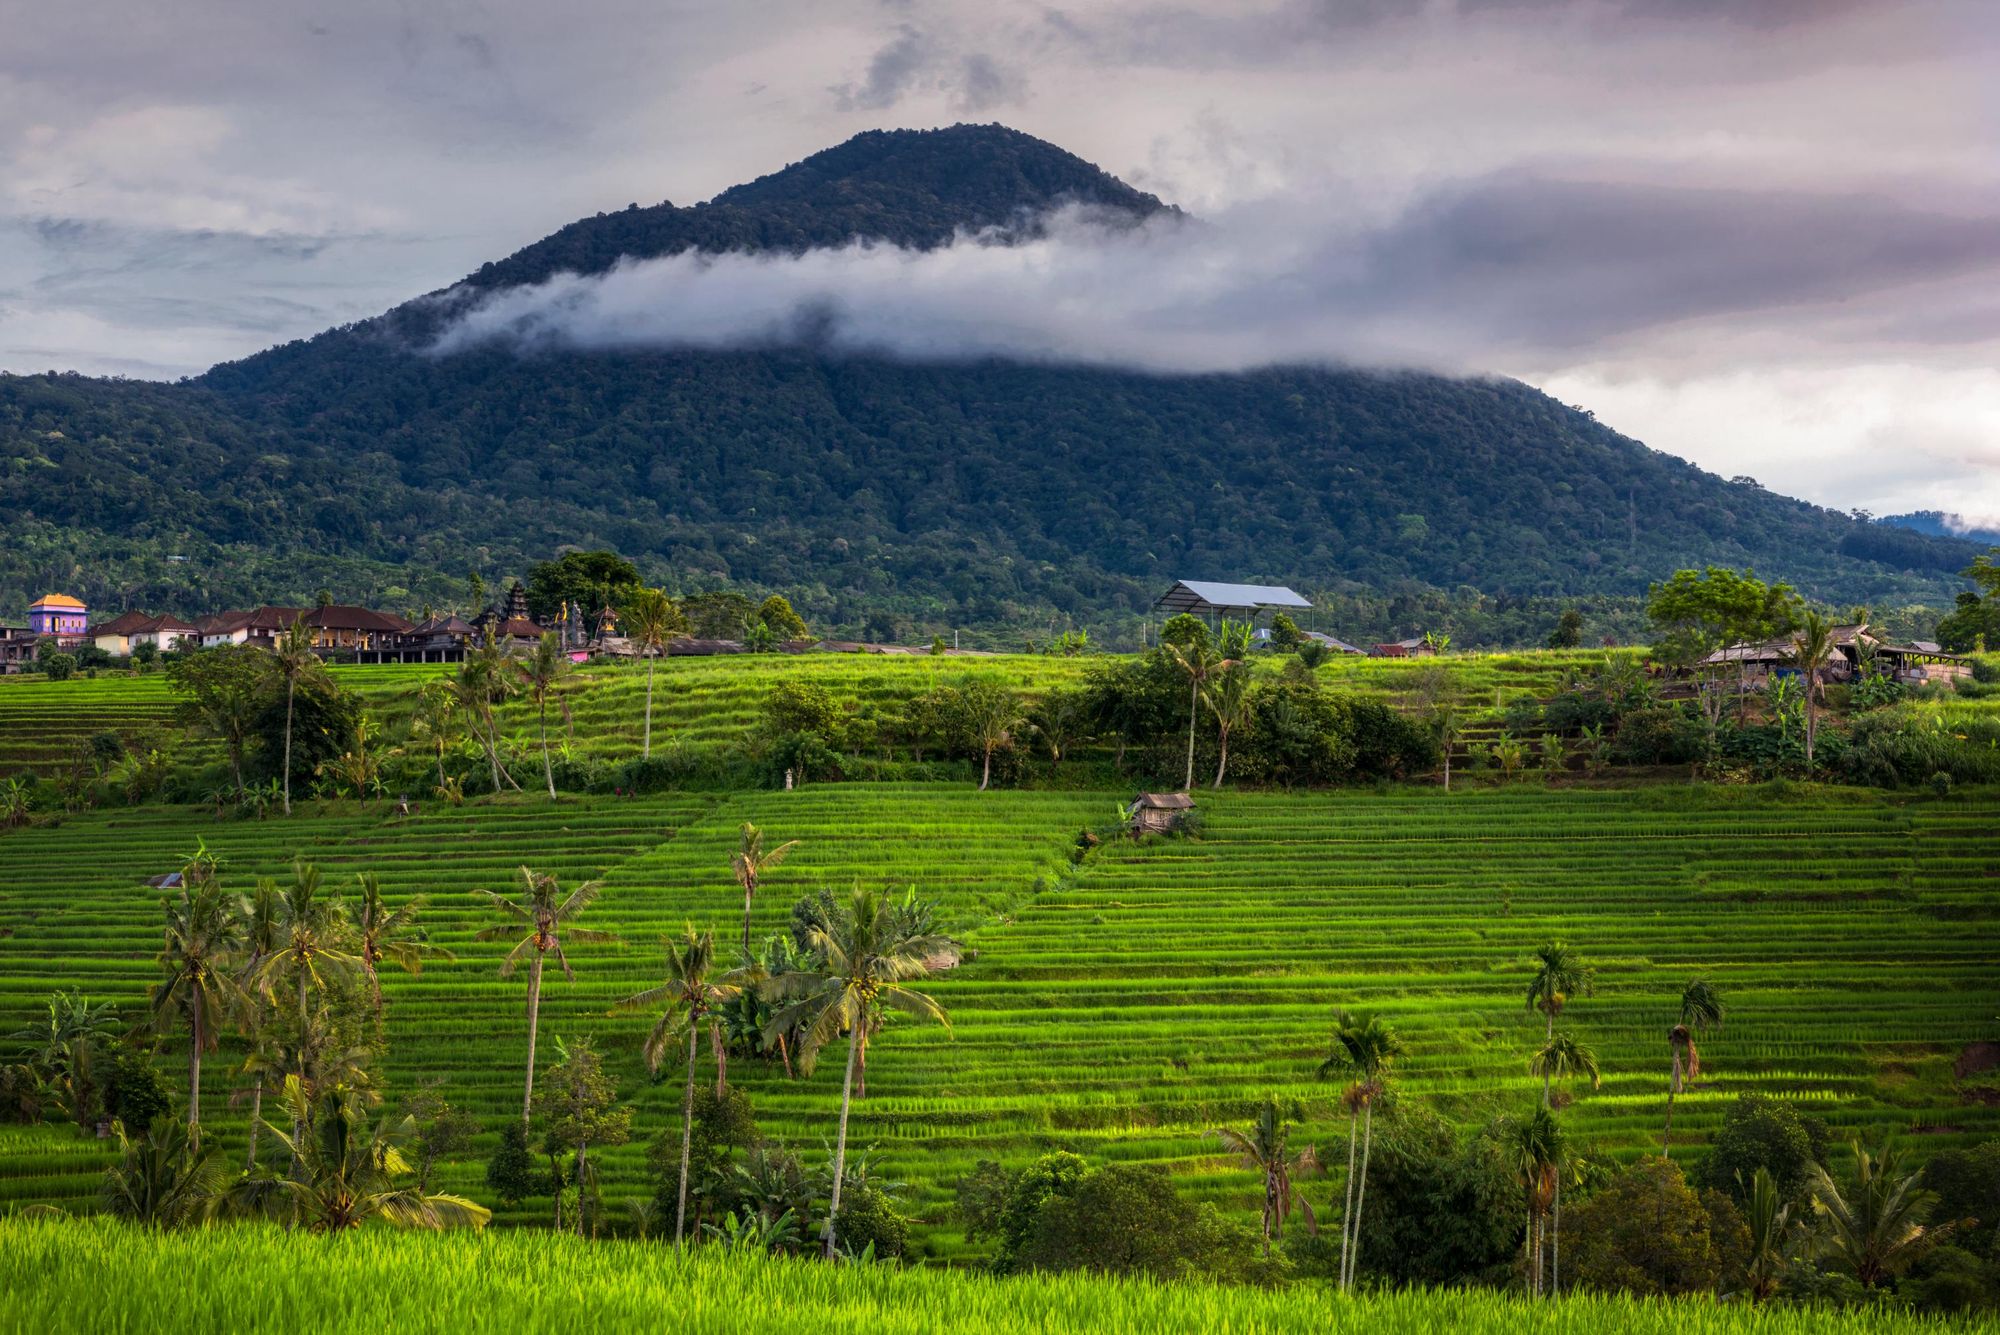 A shot from Jati Luwih Rice Terrace of the huge Mount Batukaru, covered in forest. Photo: Getty